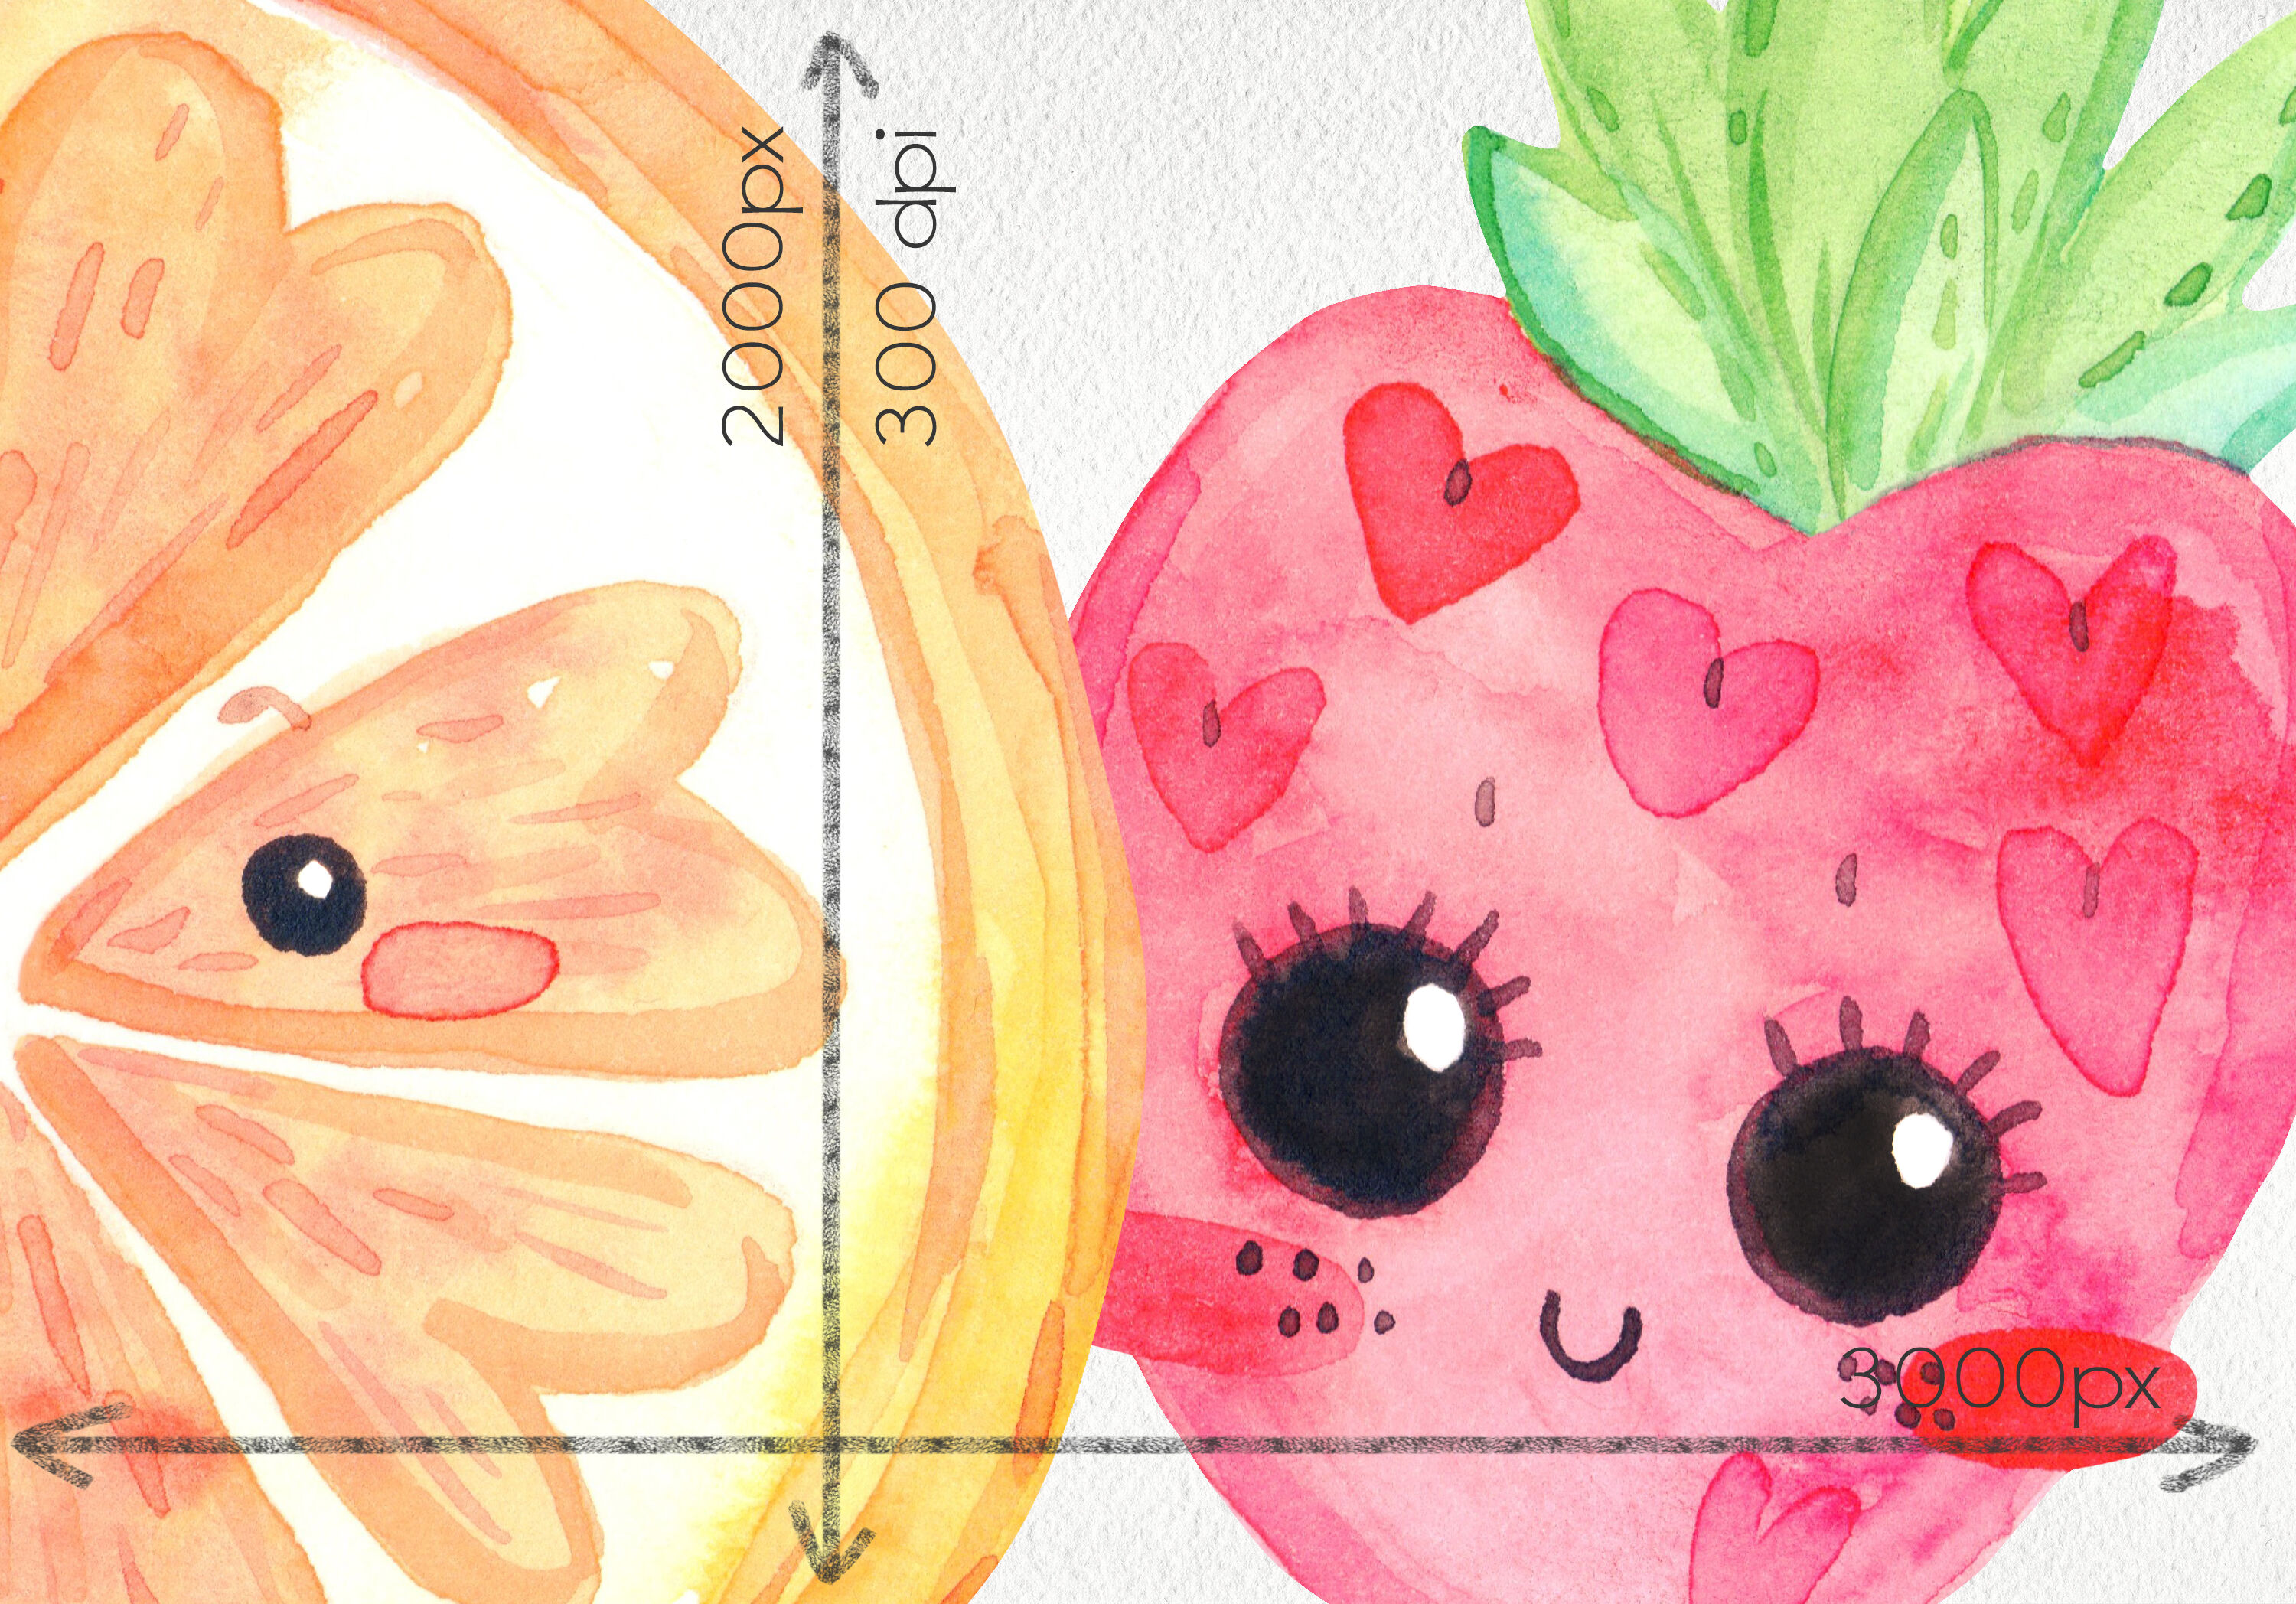 Cute Fruit Character Doodle Art Set Hand Drawn by ChickChick on Dribbble